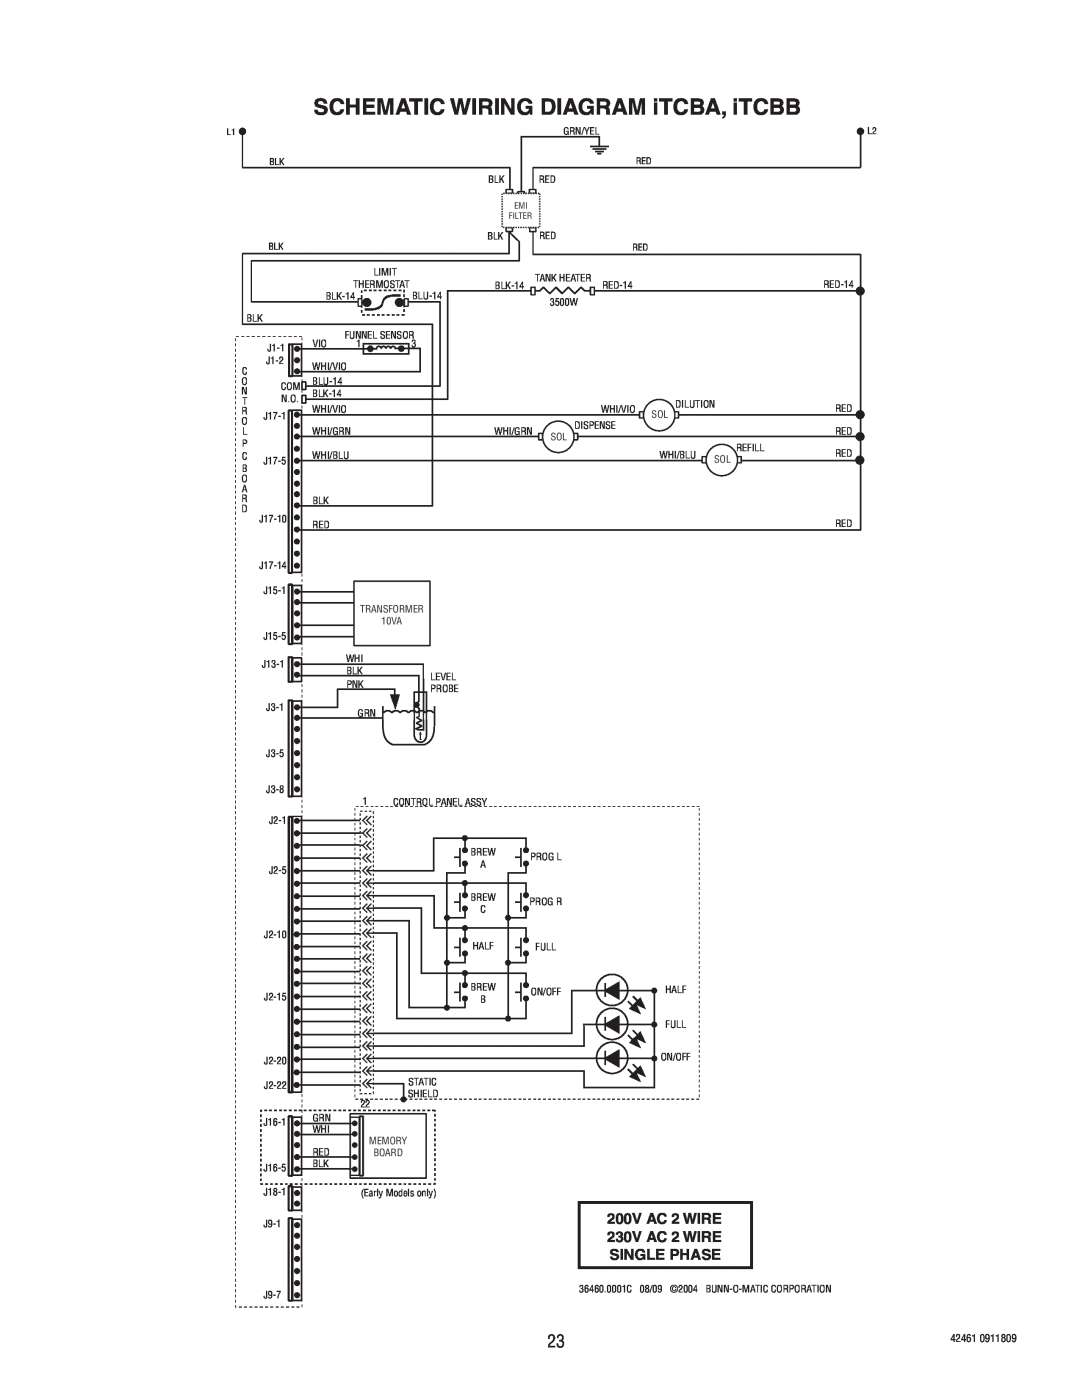 Bunn ITB/ITCB, ICB/TWIN manual SCHEMATIC WIRING DIAGRAM iTCBA, iTCBB, 200V AC 2 WIRE, 230V AC 2 WIRE, Single Phase 